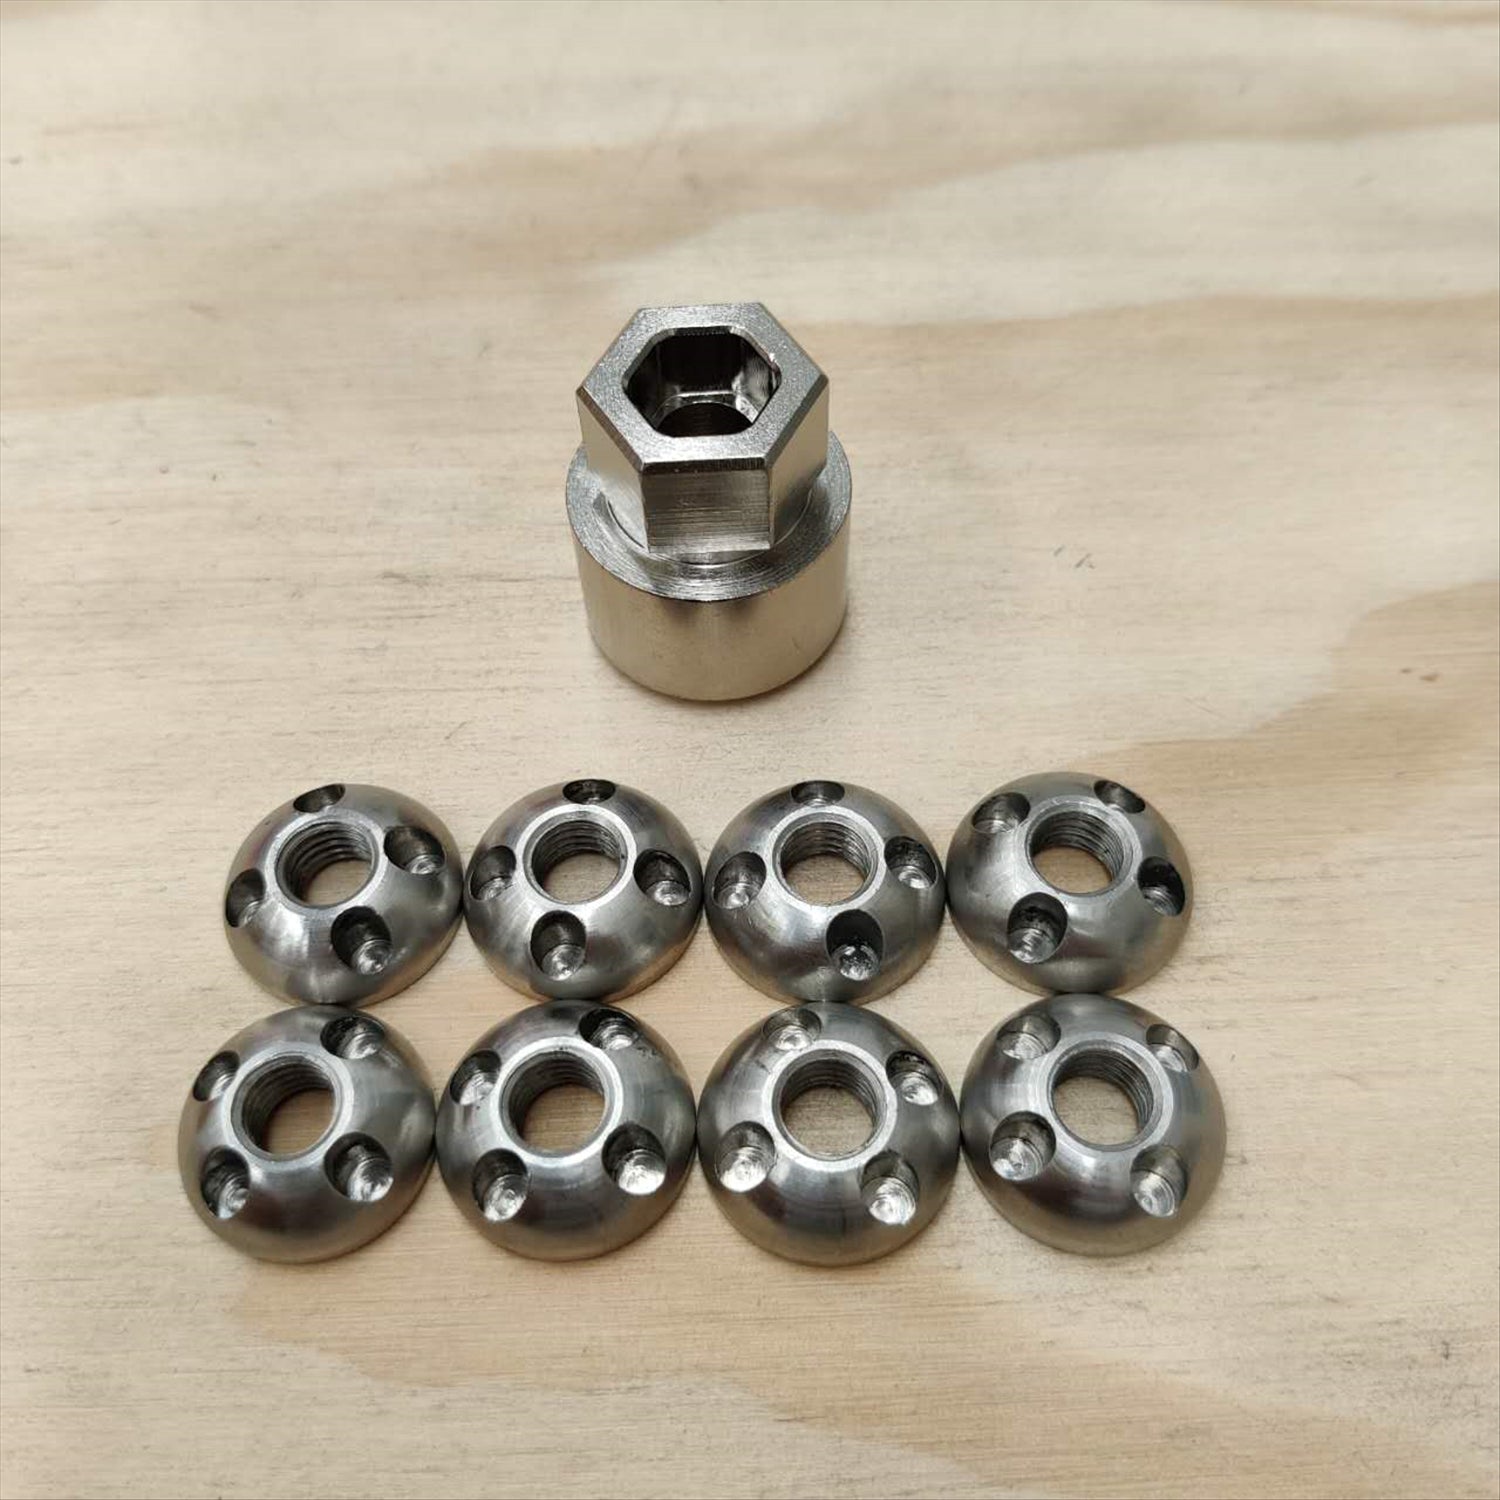 Roof Top Tent Security Nuts - 8 nuts and key